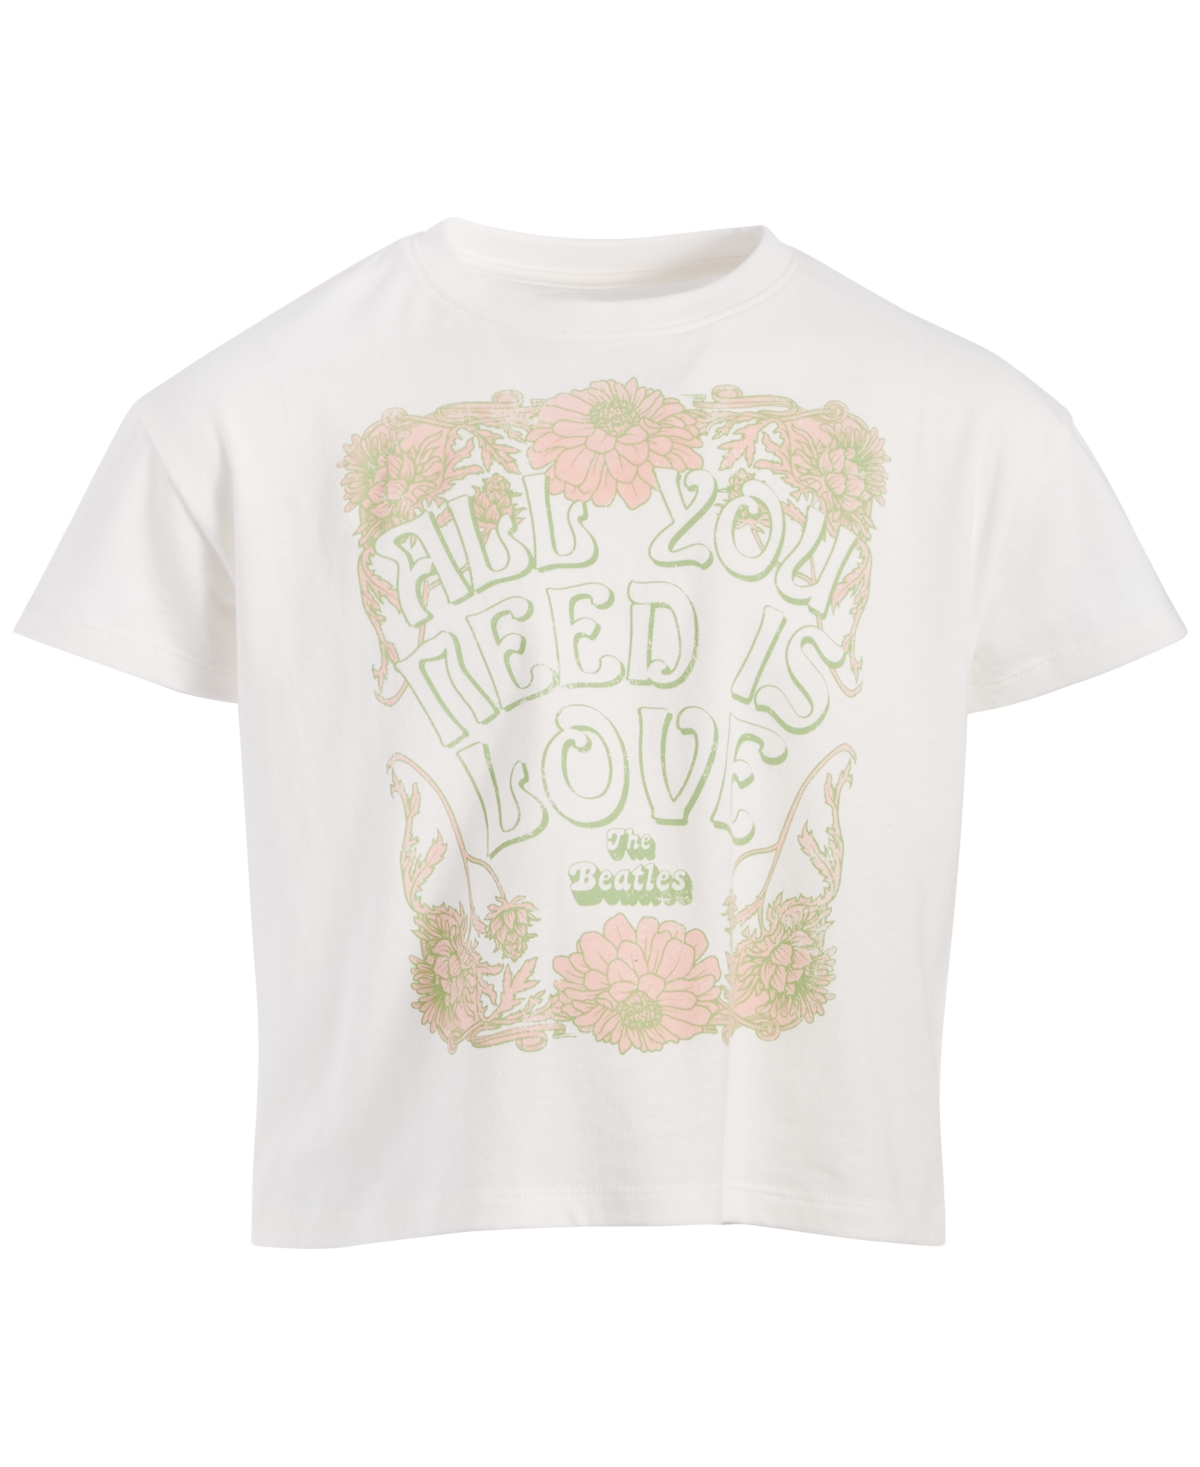 Shop Grayson Threads, The Label Grayson Threads Kids, The Label Big Girls Love The Beatles Graphic T-shirt In Offwhite